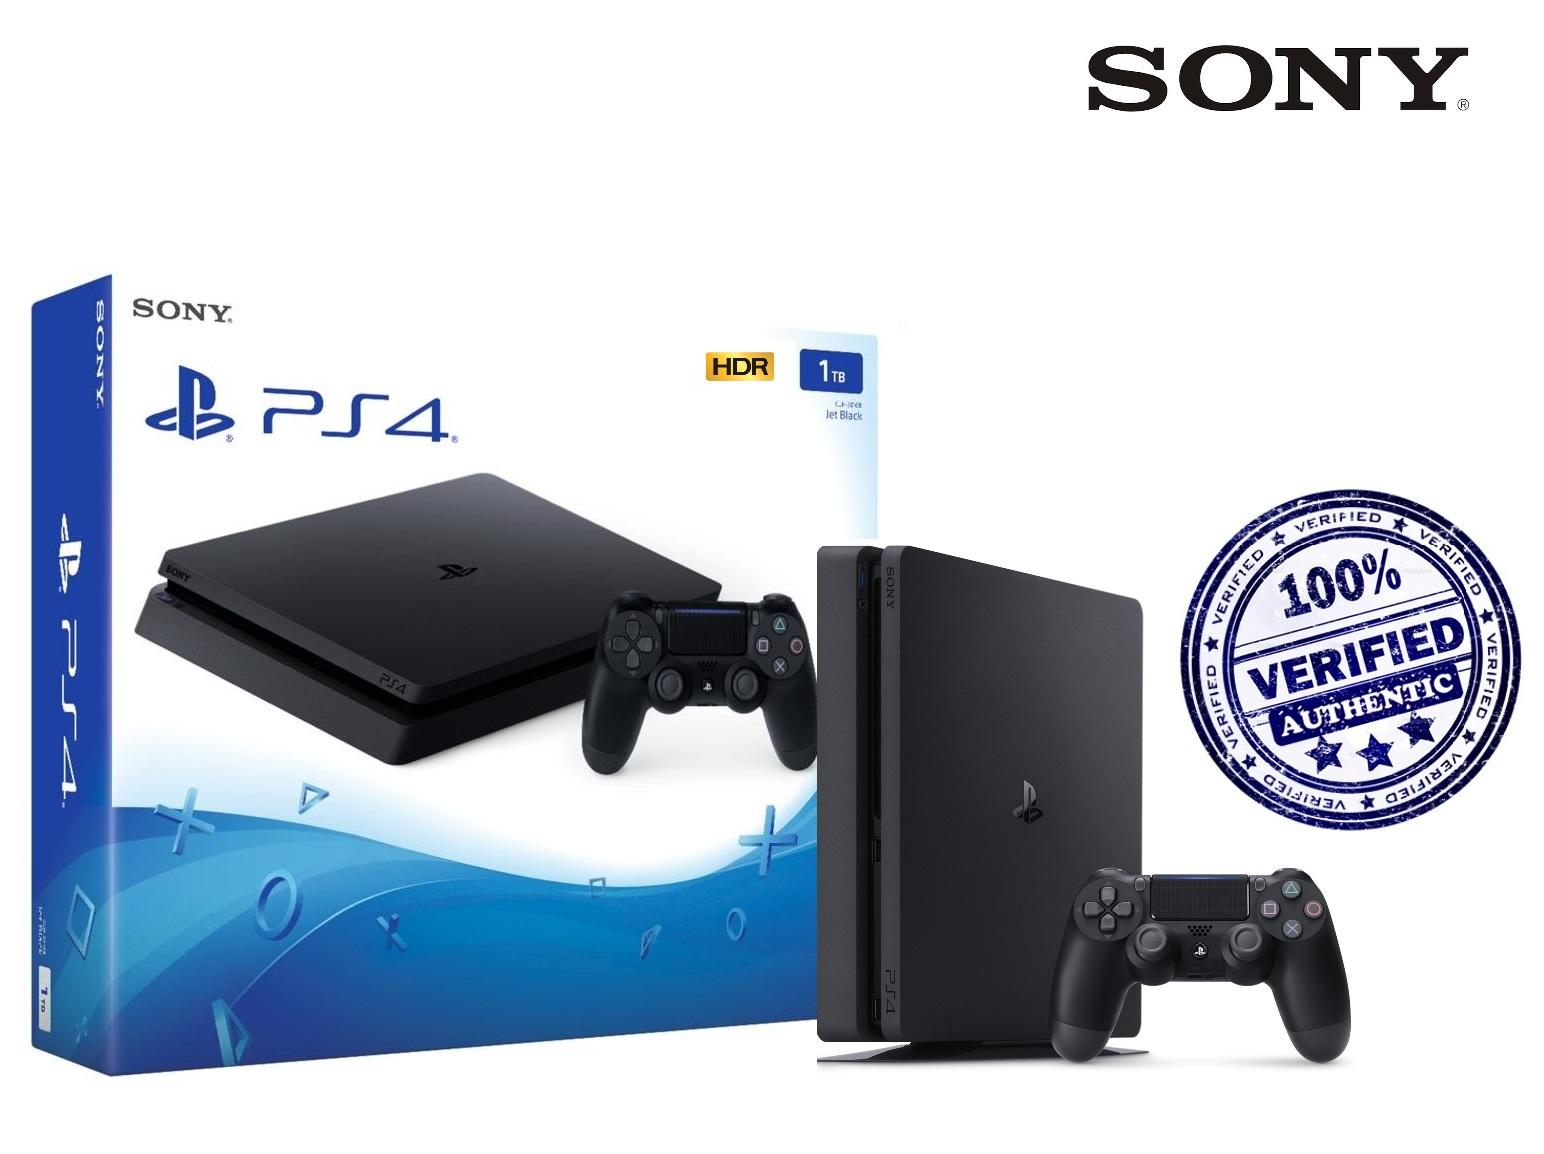 sony ps4 hdr 1tb